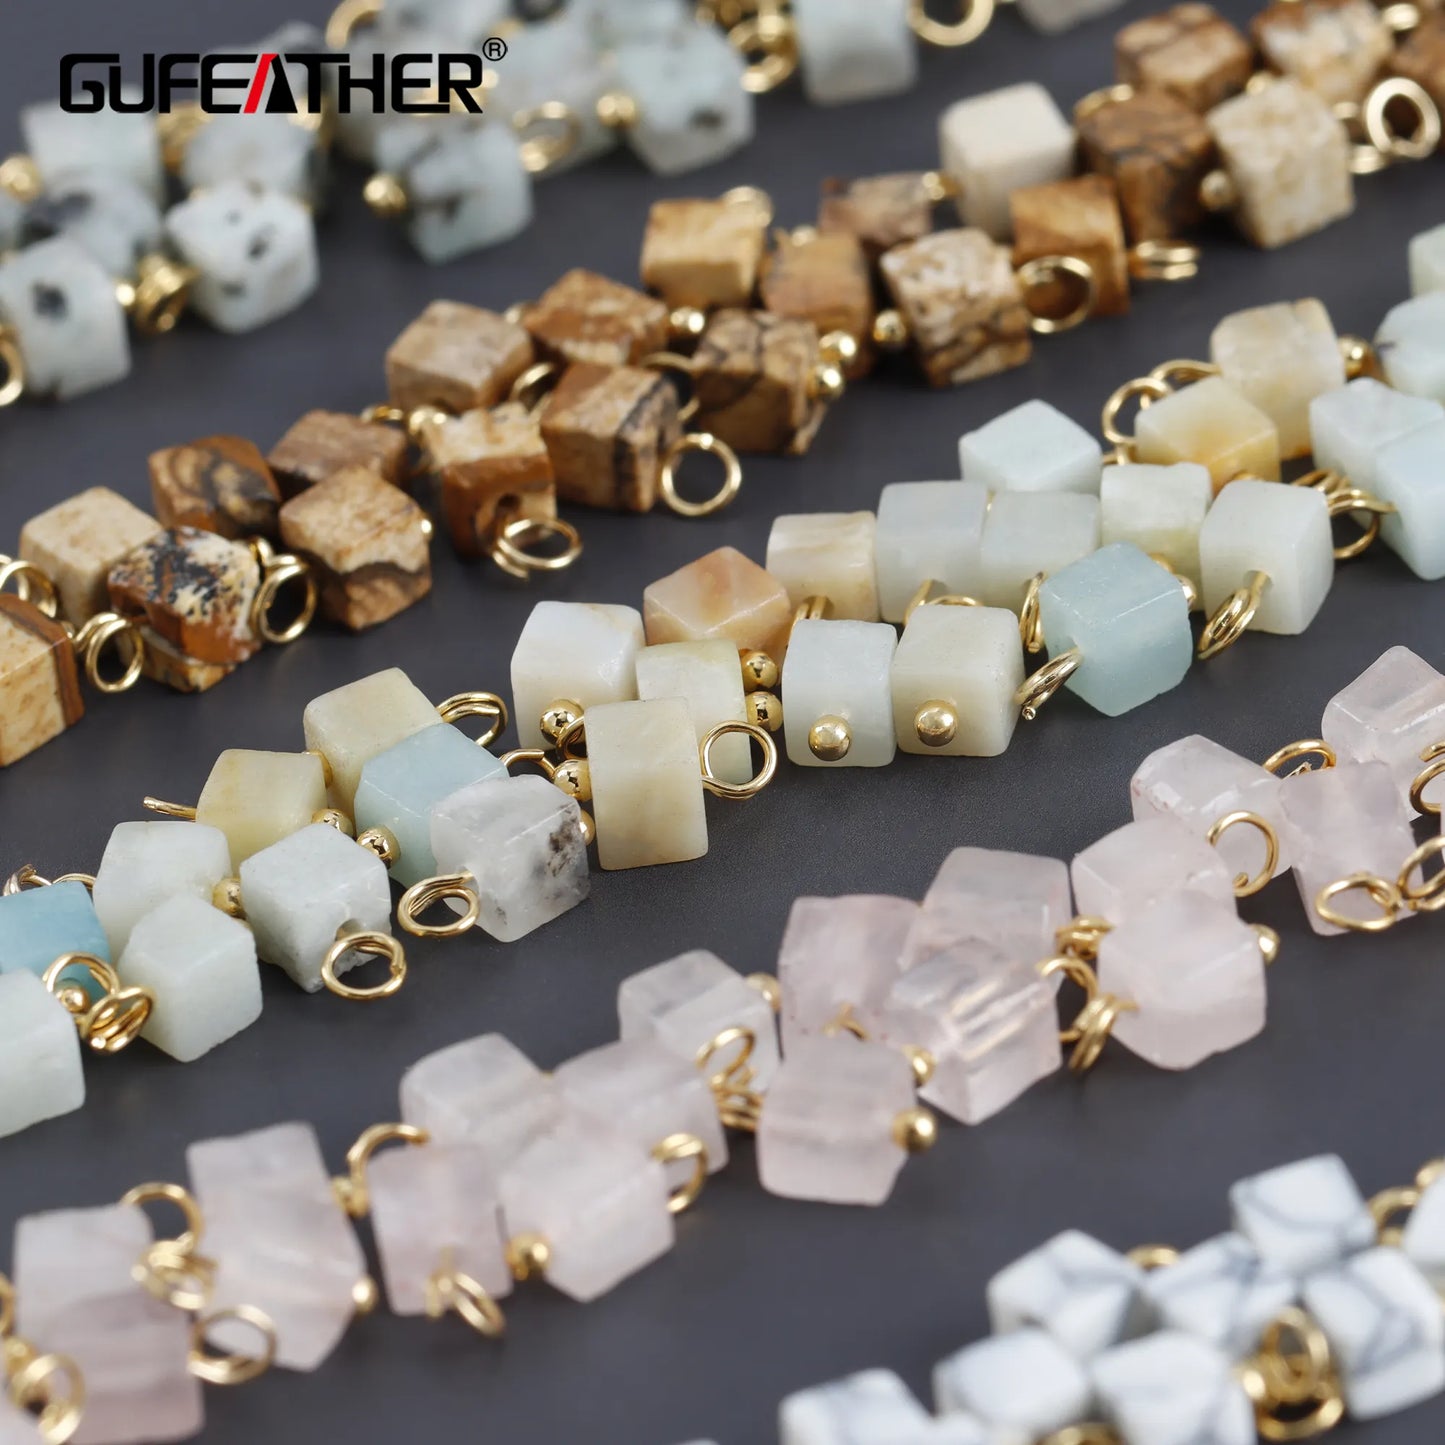 GUFEATHER MA34,jewelry accessories,nickel free,18k gold plated,natural stone,diy pendants,jewelry making,diy earrings,20pcs/lot